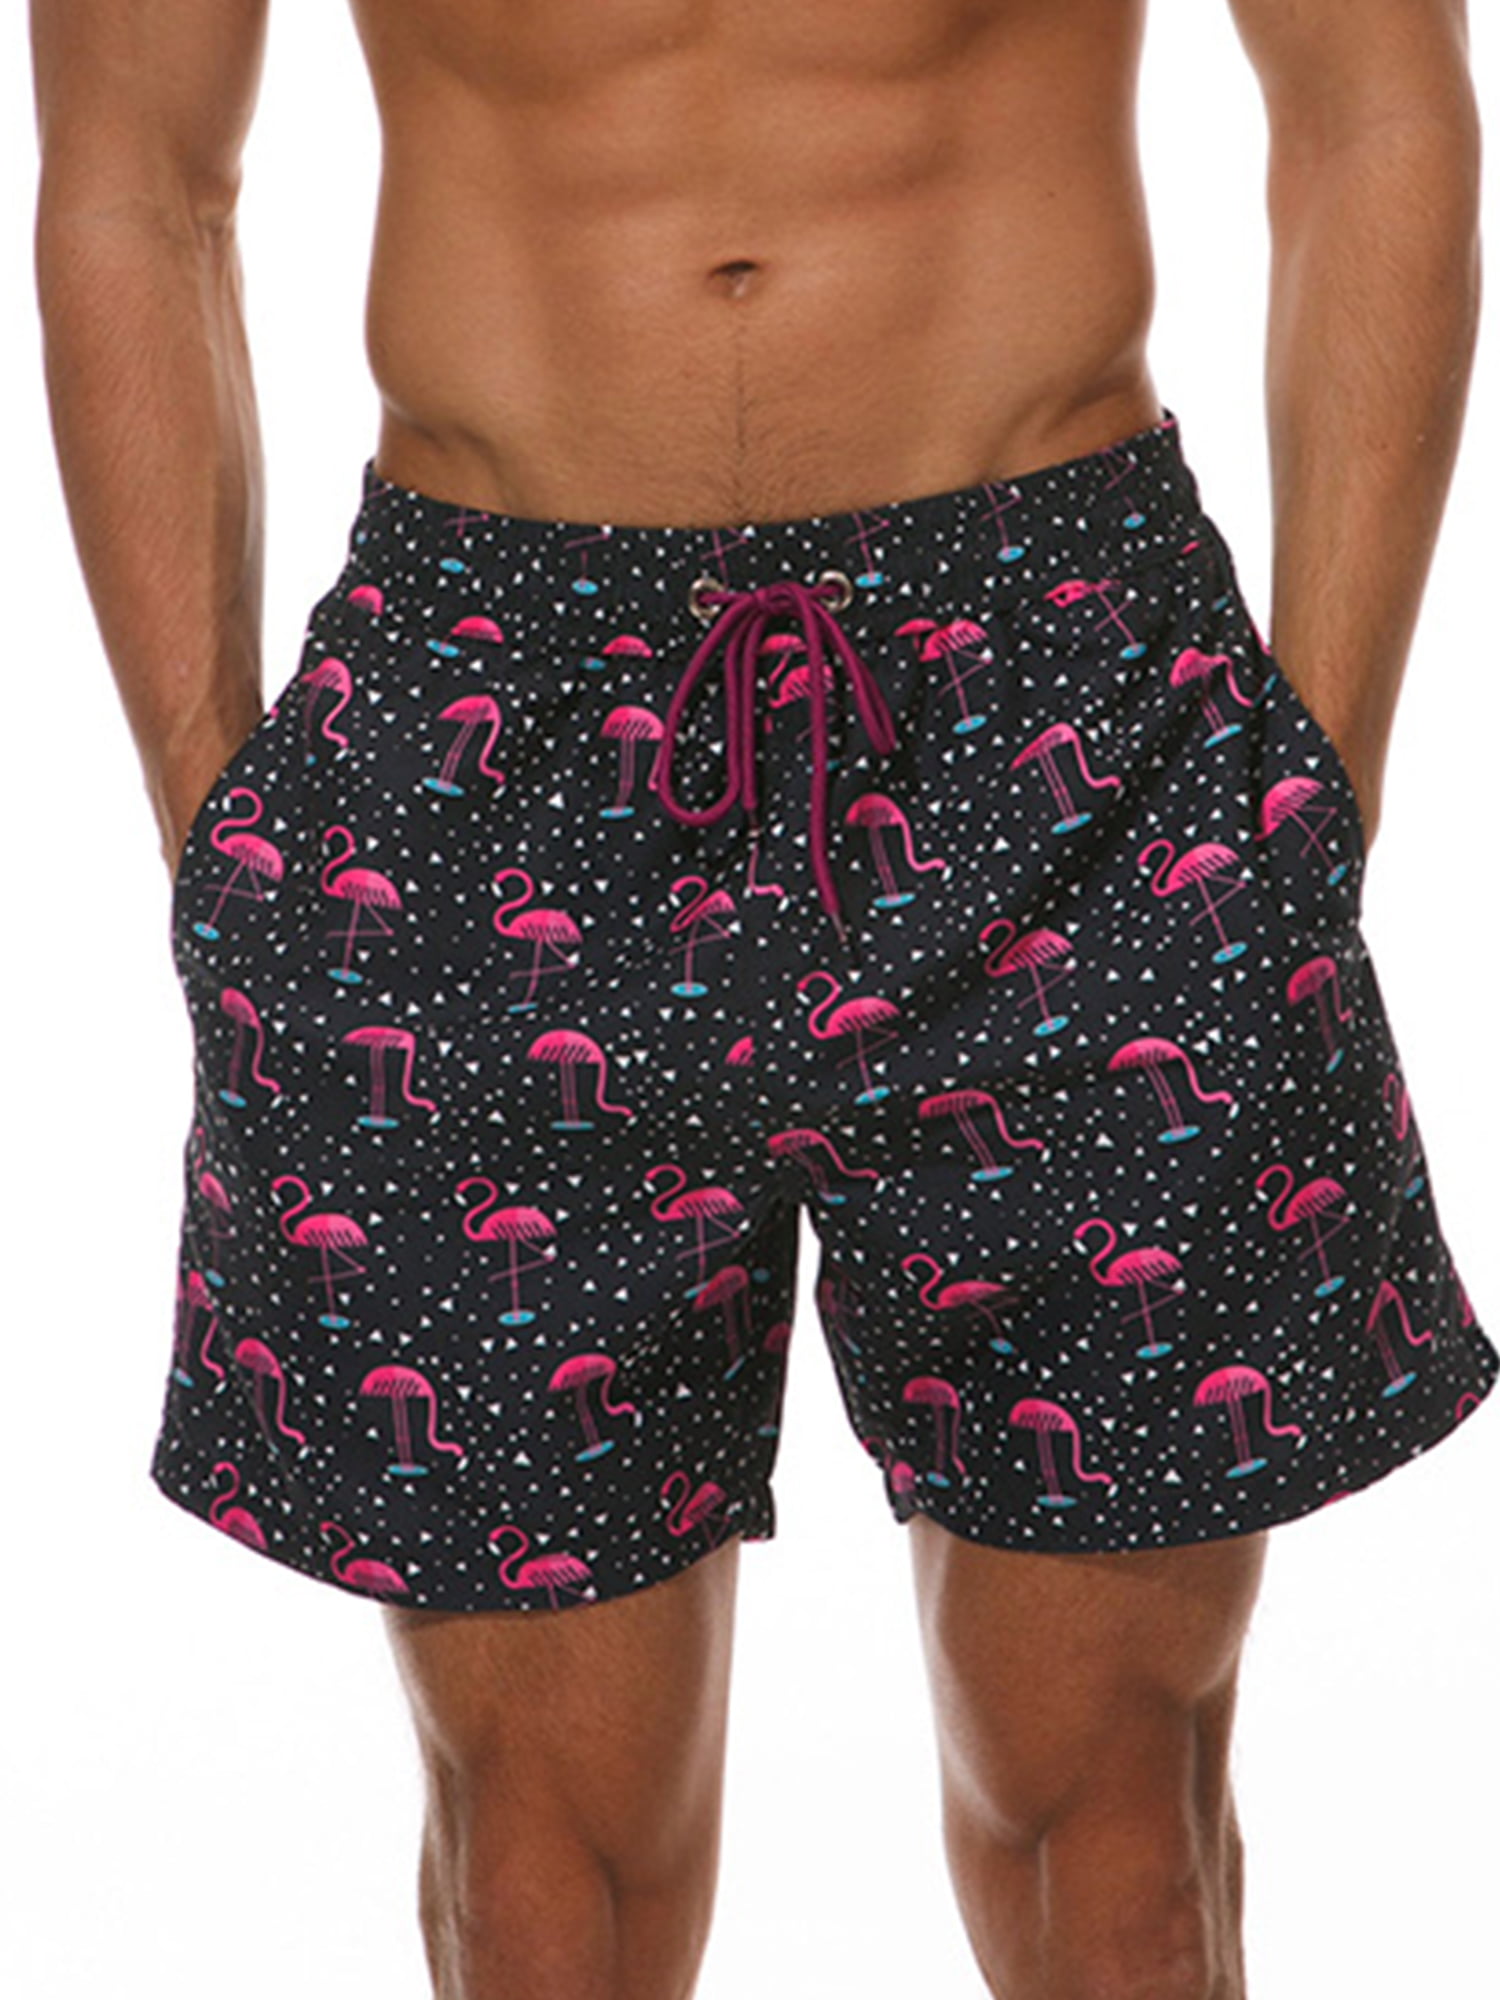 Big Sharks Mouth Black Background Mens Beach Pants Swimming Trunks Dry Fit Boardshorts with Pockets